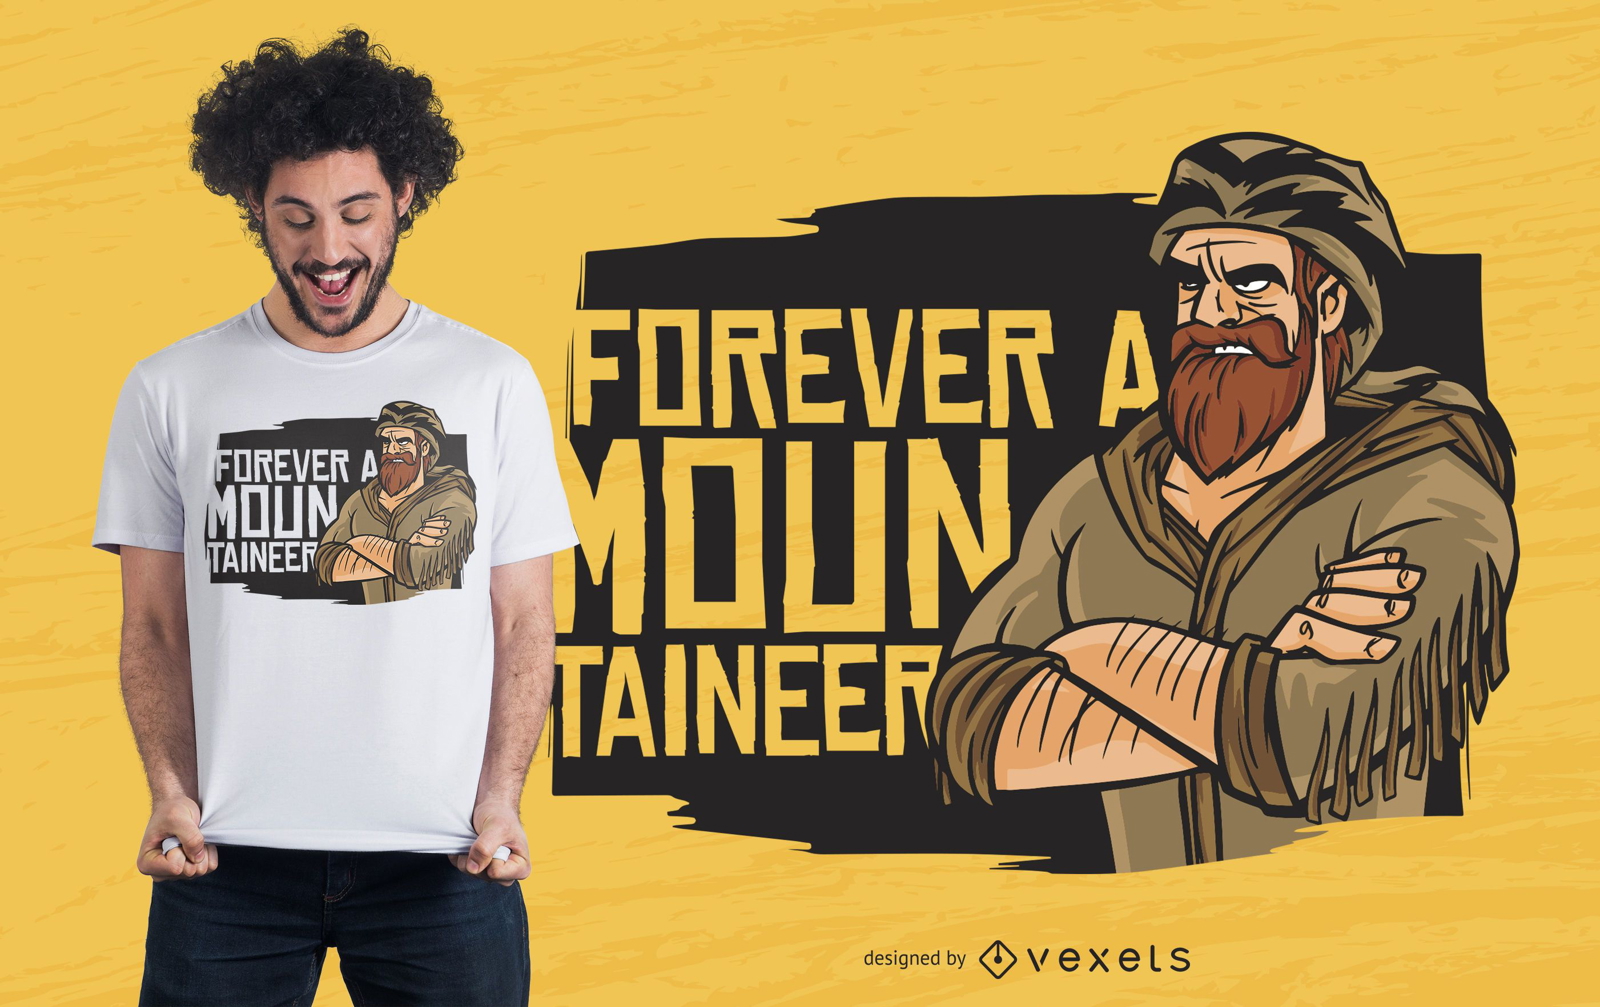 Forever a mountaineer t-shirt design